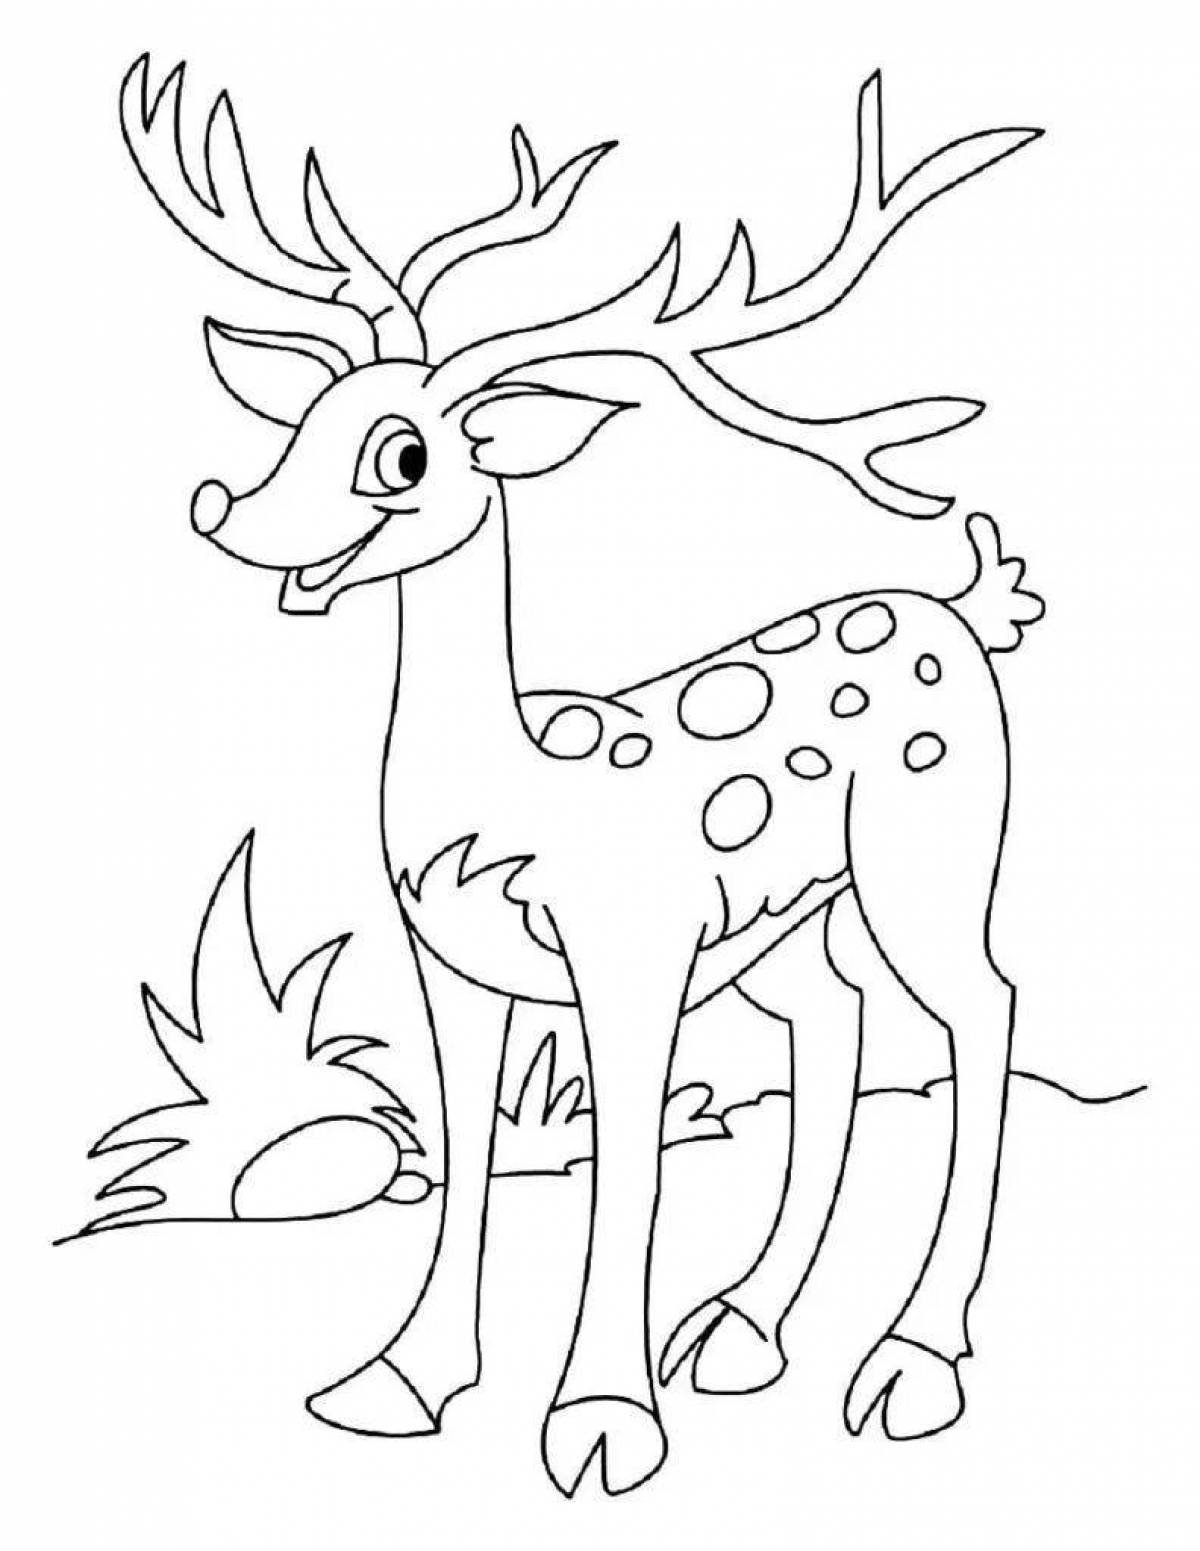 Shiny silver hoof coloring page